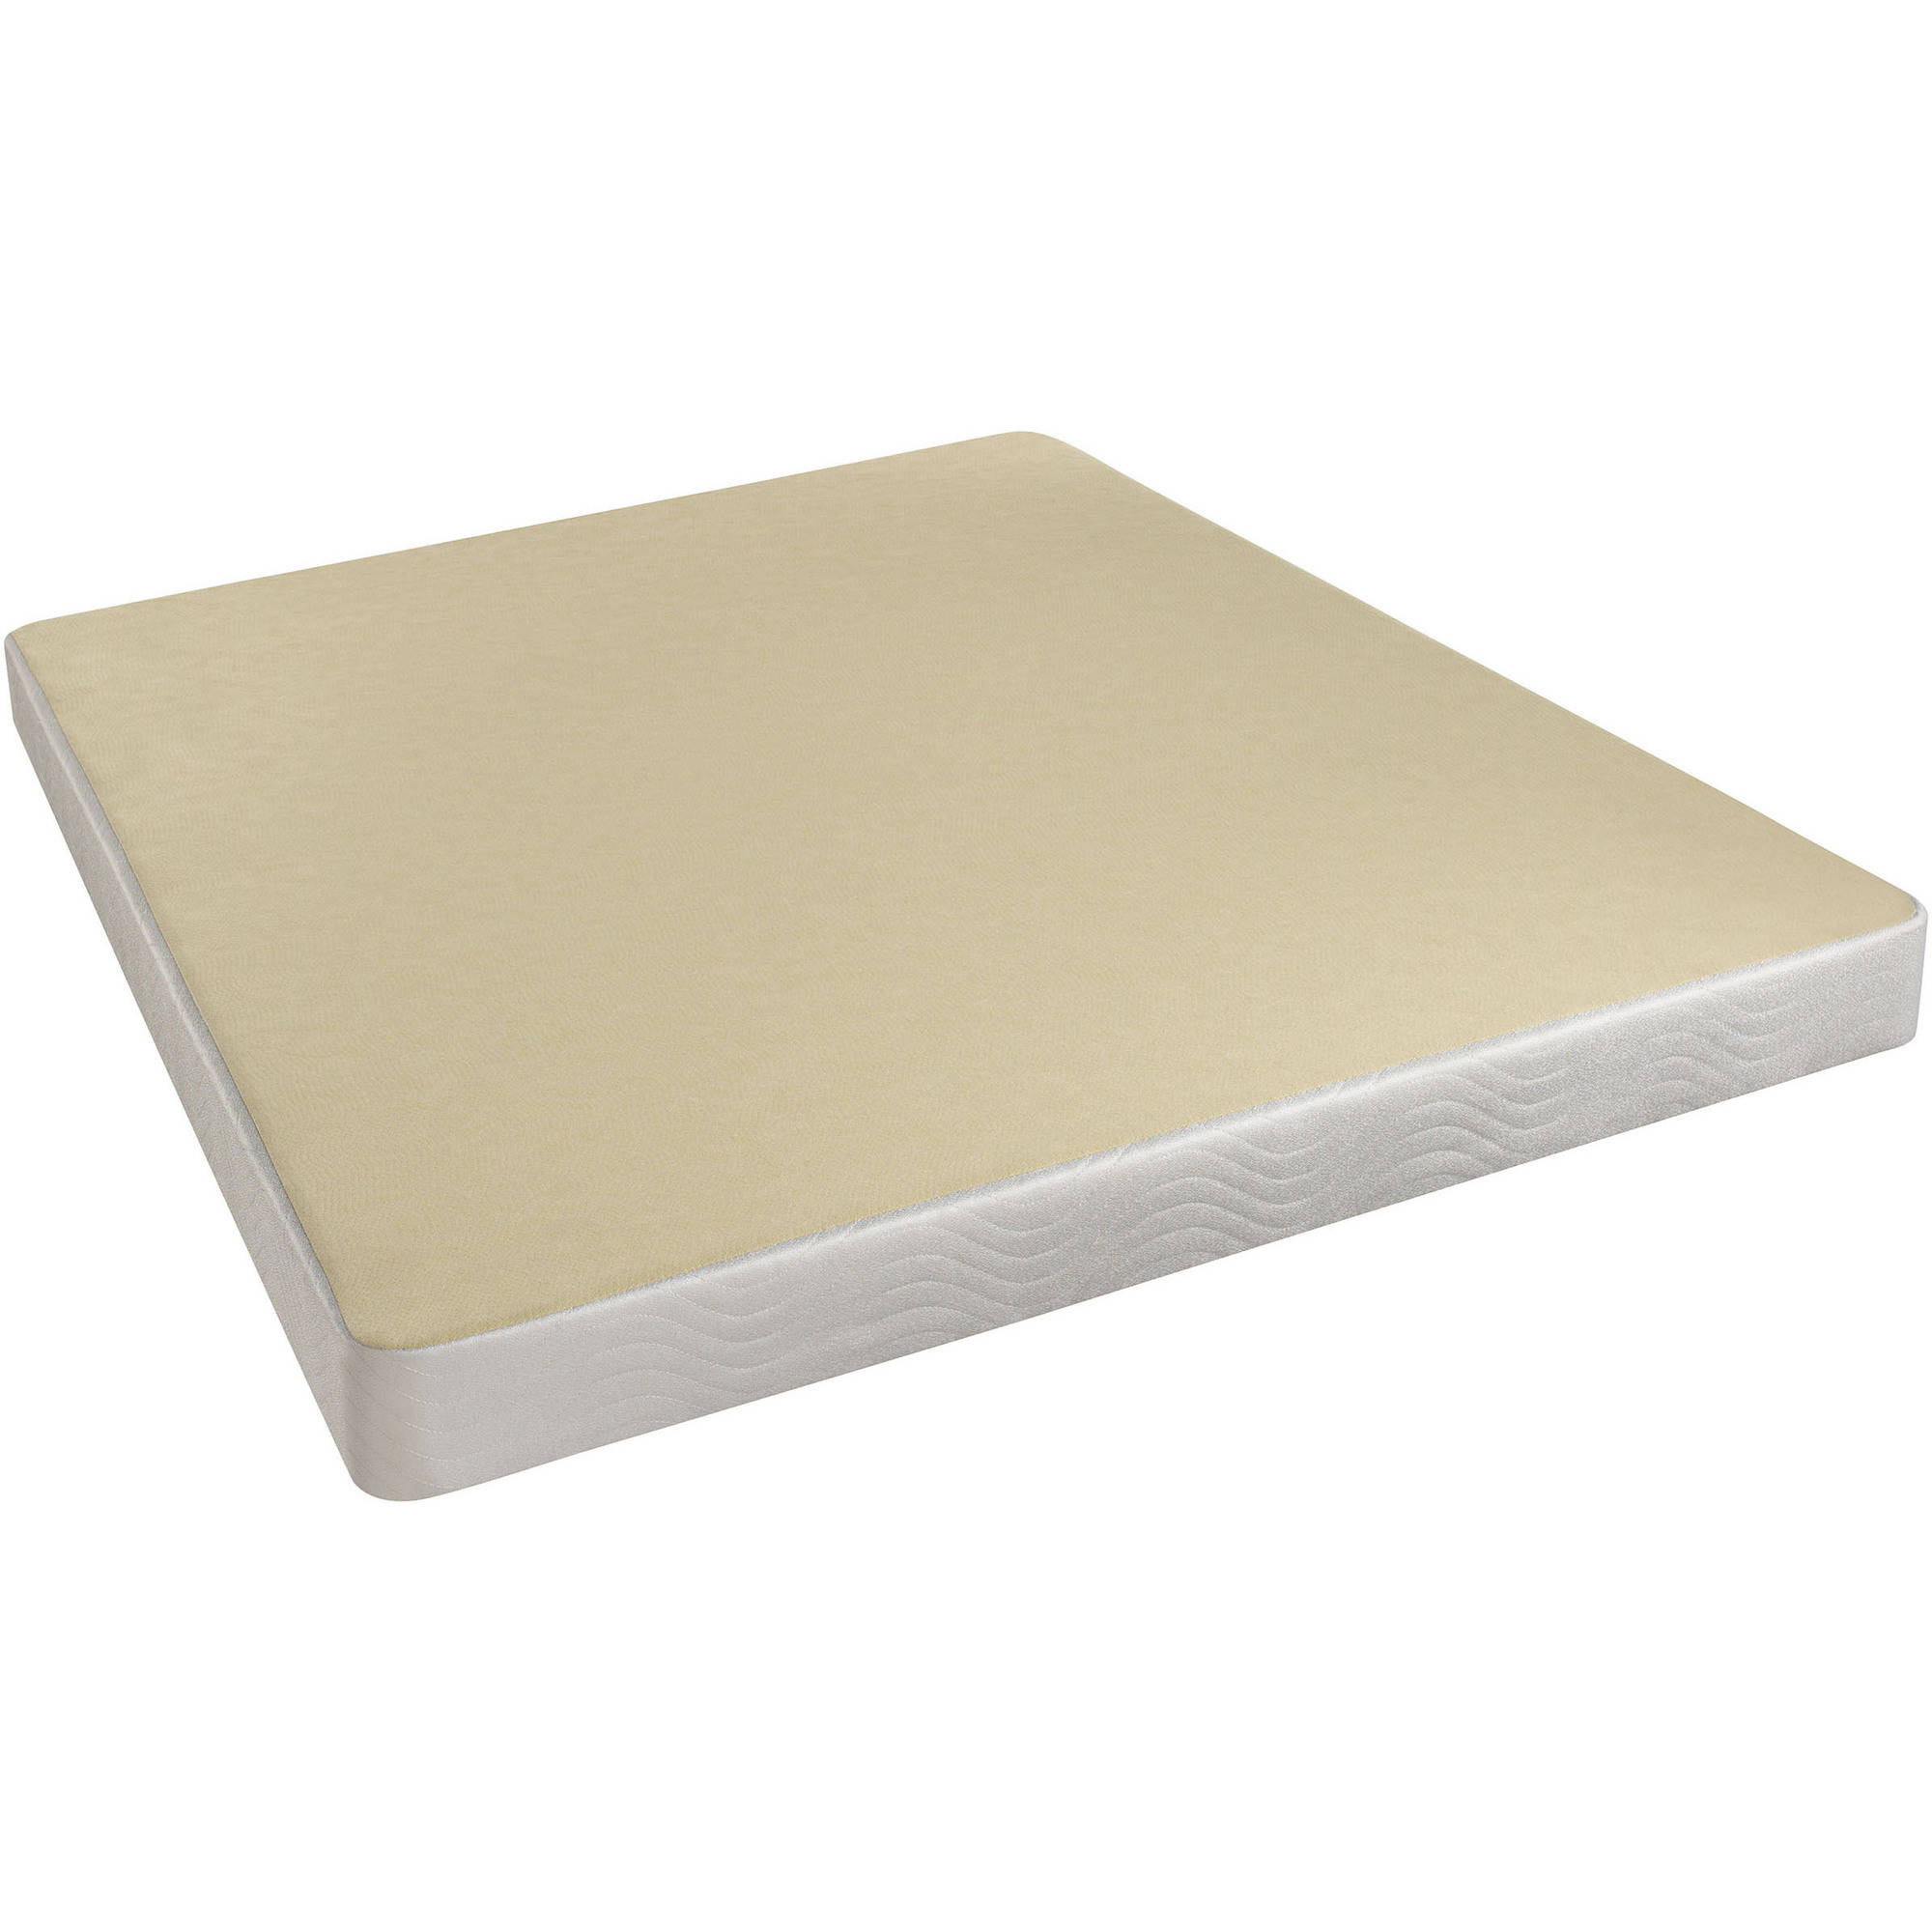 Simmons Beautyrest 5.5" Low-Profile Triton Foundation - image 1 of 1